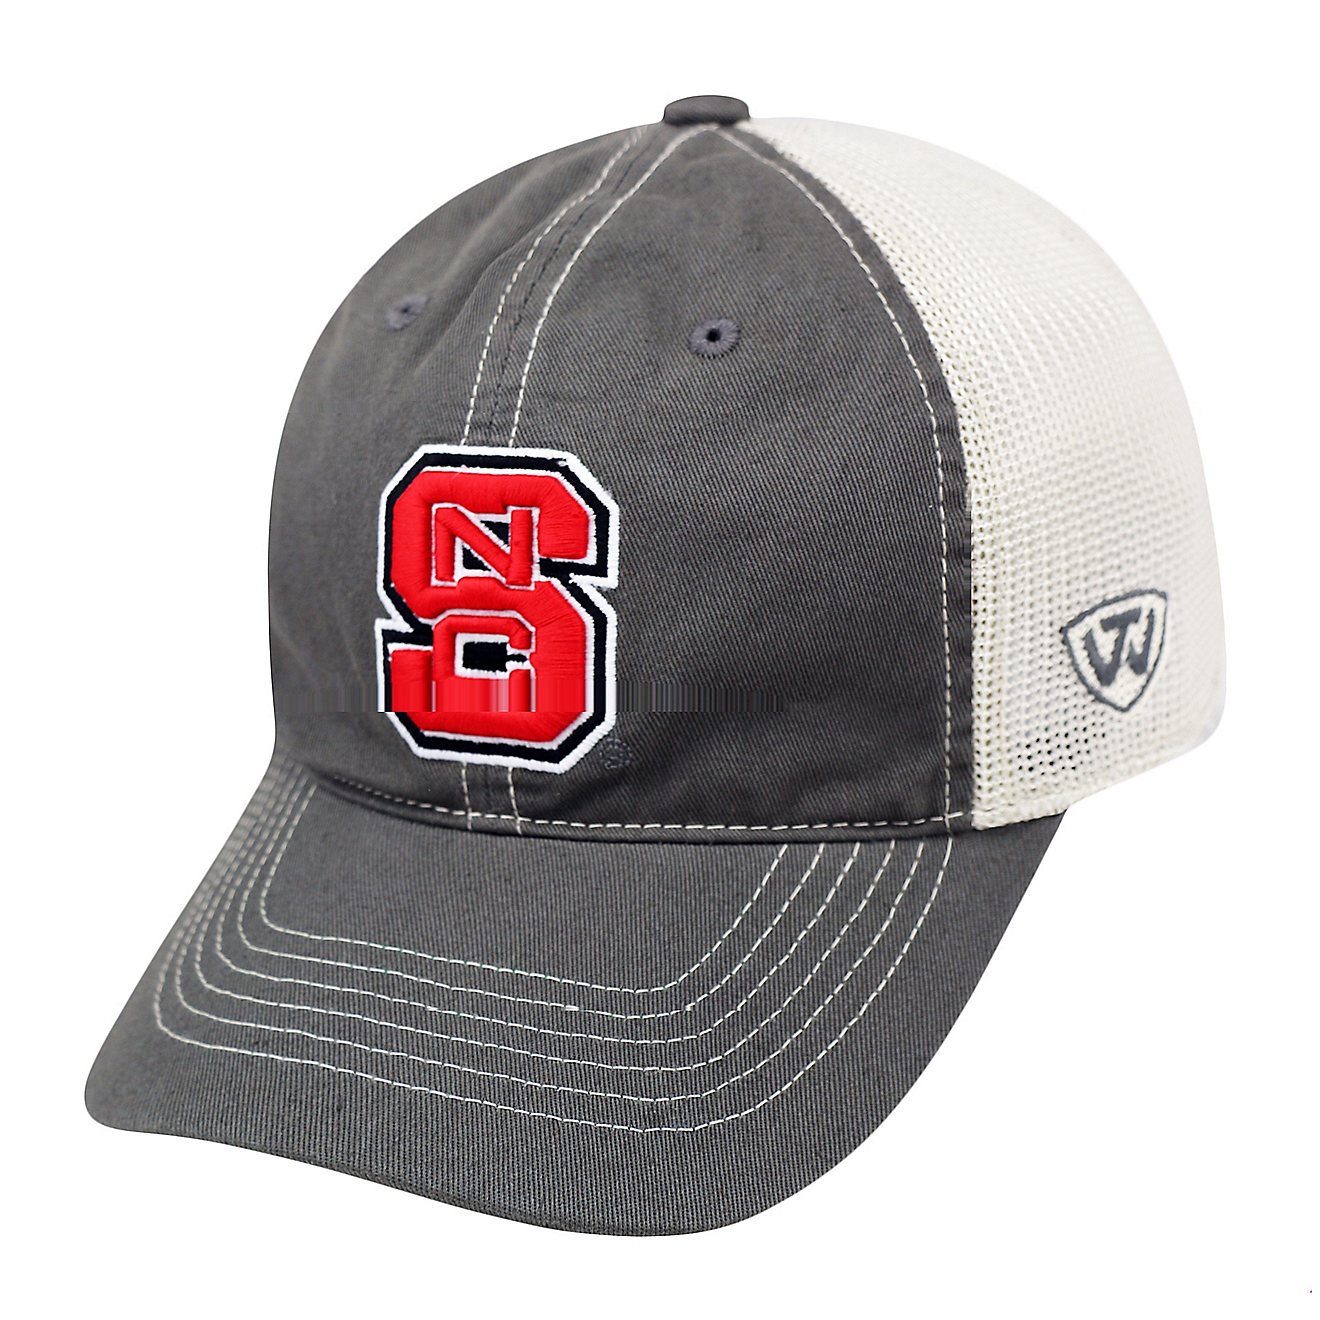 Top of the World Men's North Carolina State University Putty Cap                                                                 - view number 1